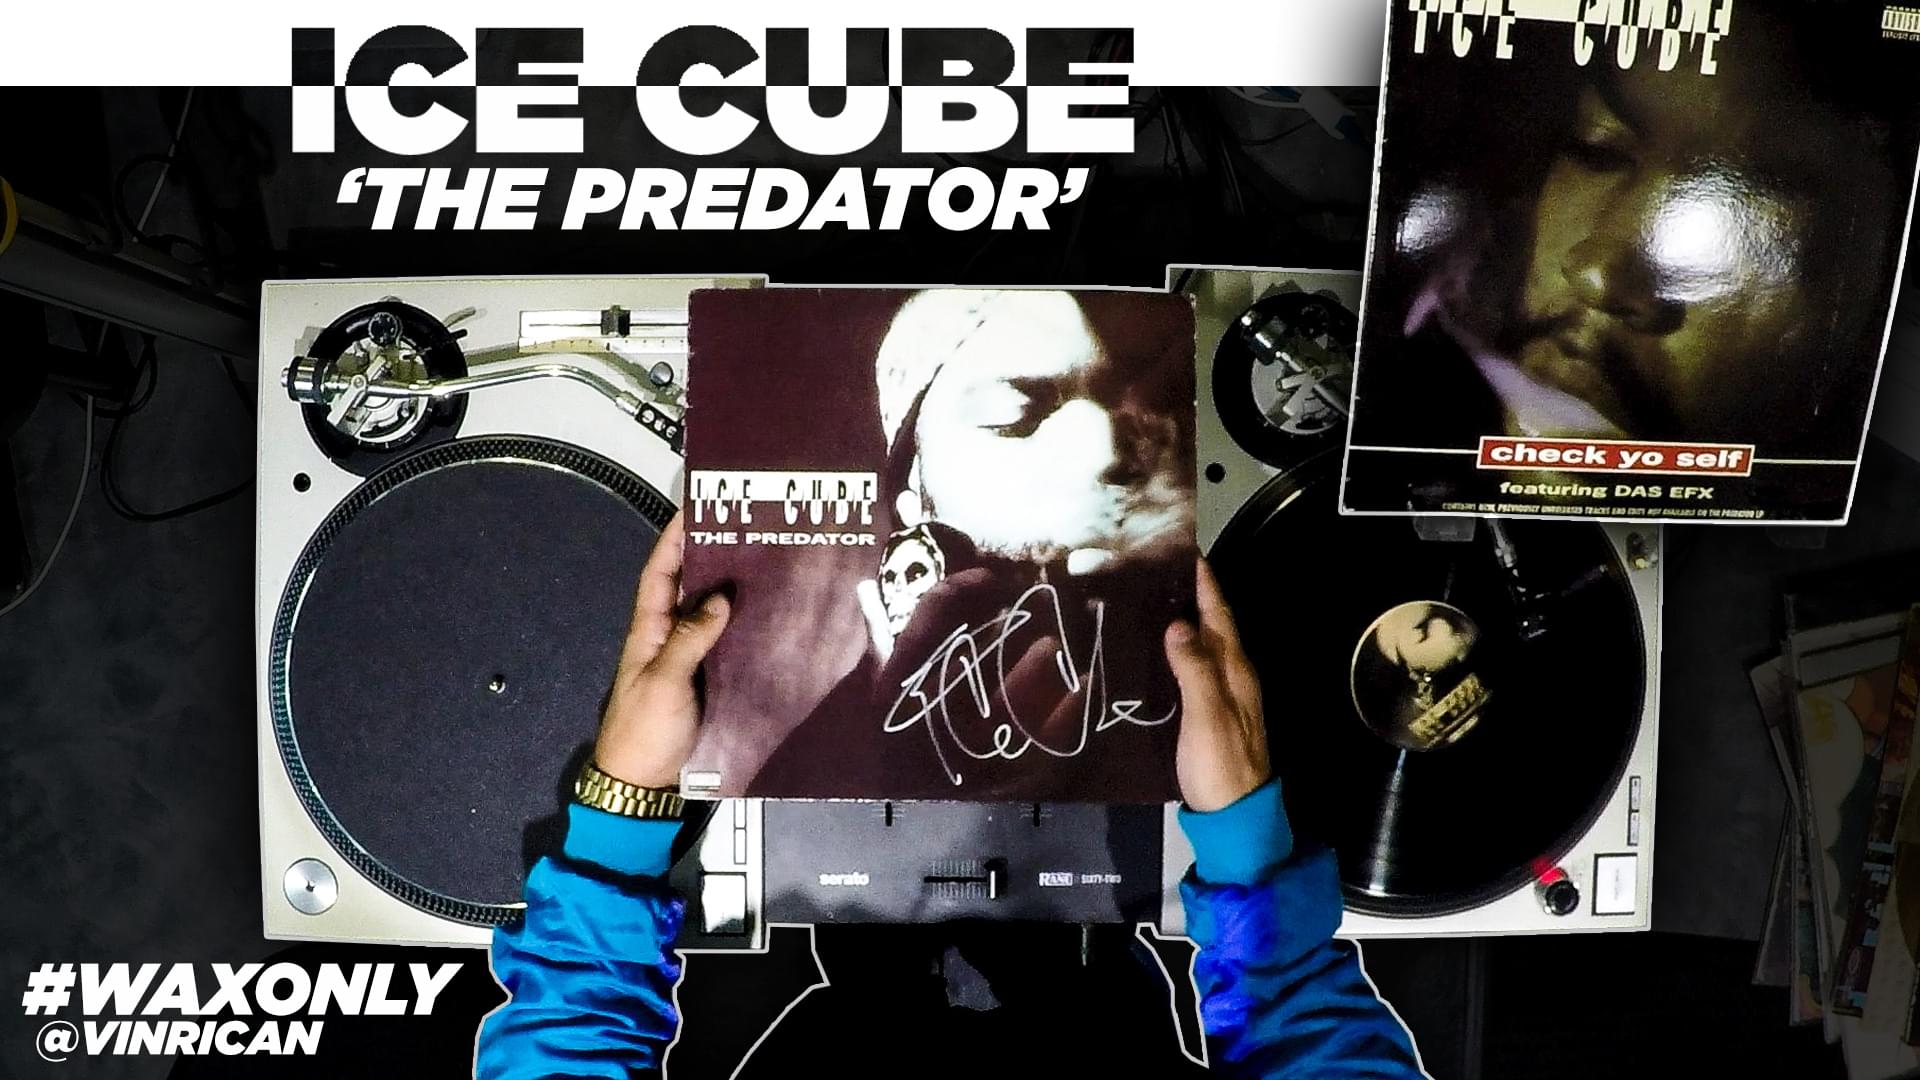 WAX ONLY: Celebrate Ice Cube’s 25th Anniversary Of ‘The Preadtor’